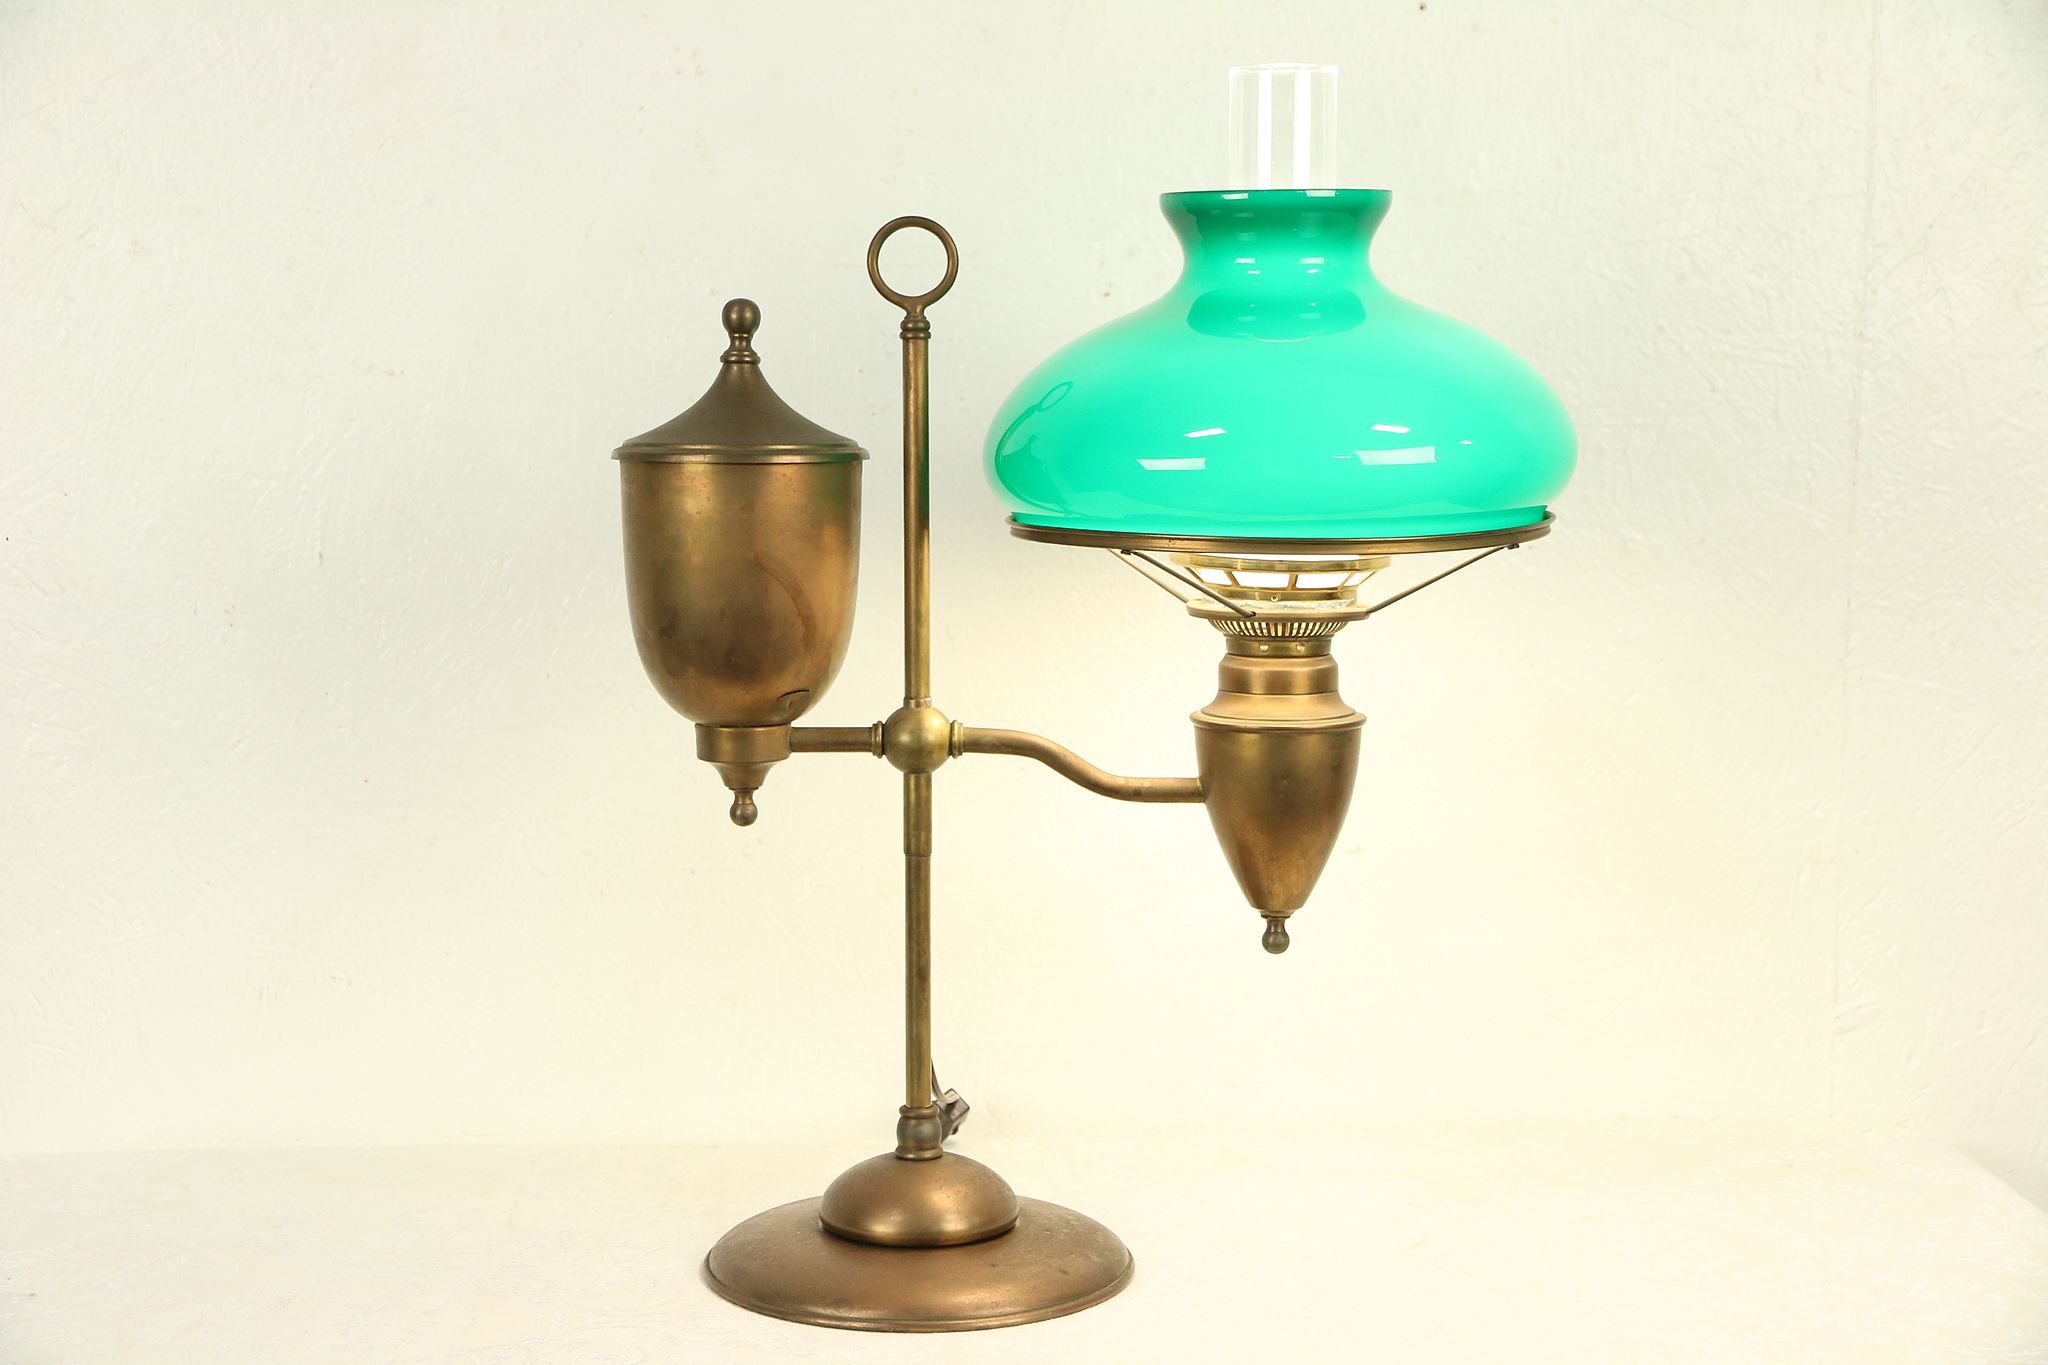 Sold Victorian Antique Student Desk Lamp Cased Green Shade